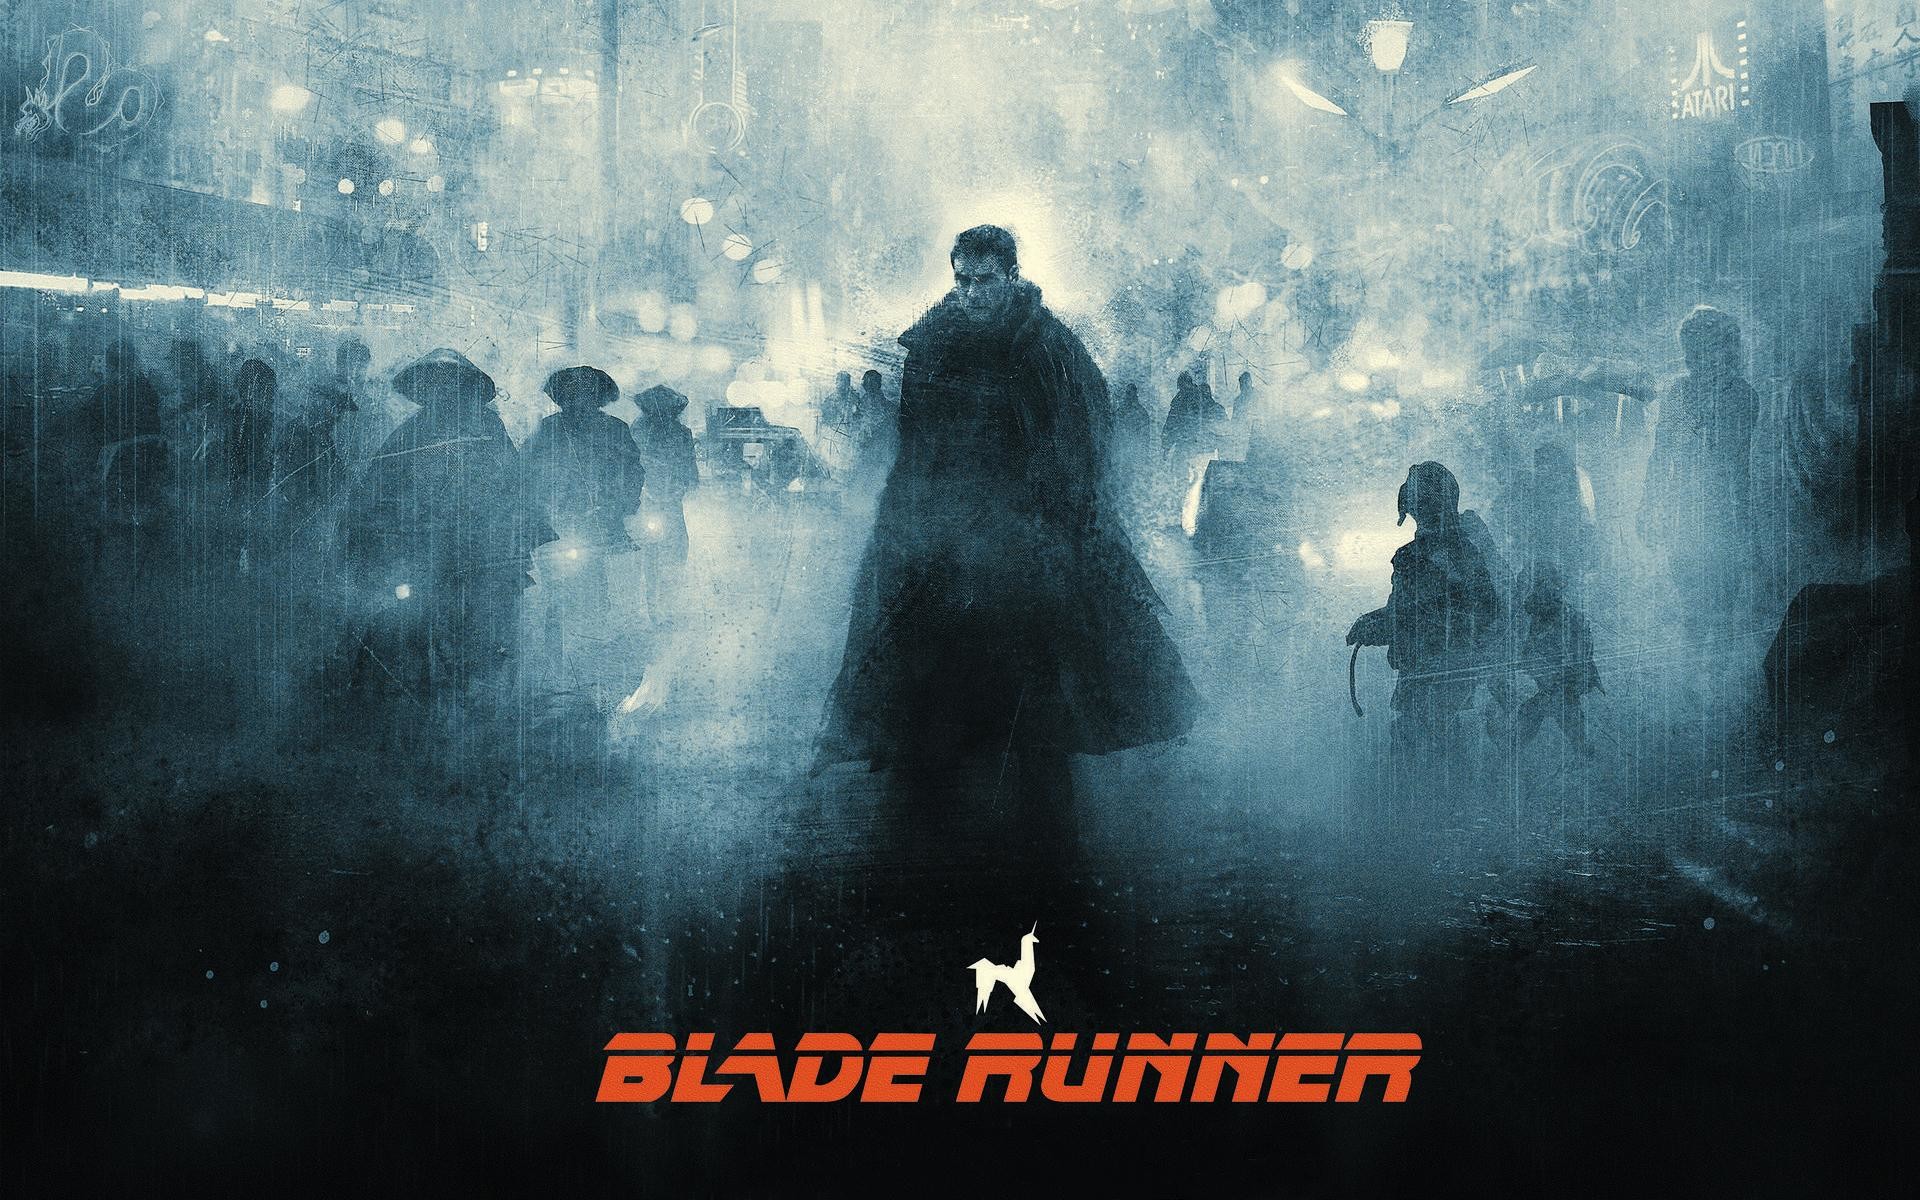 Poster by Karl Fitzgerald – Blade Runner